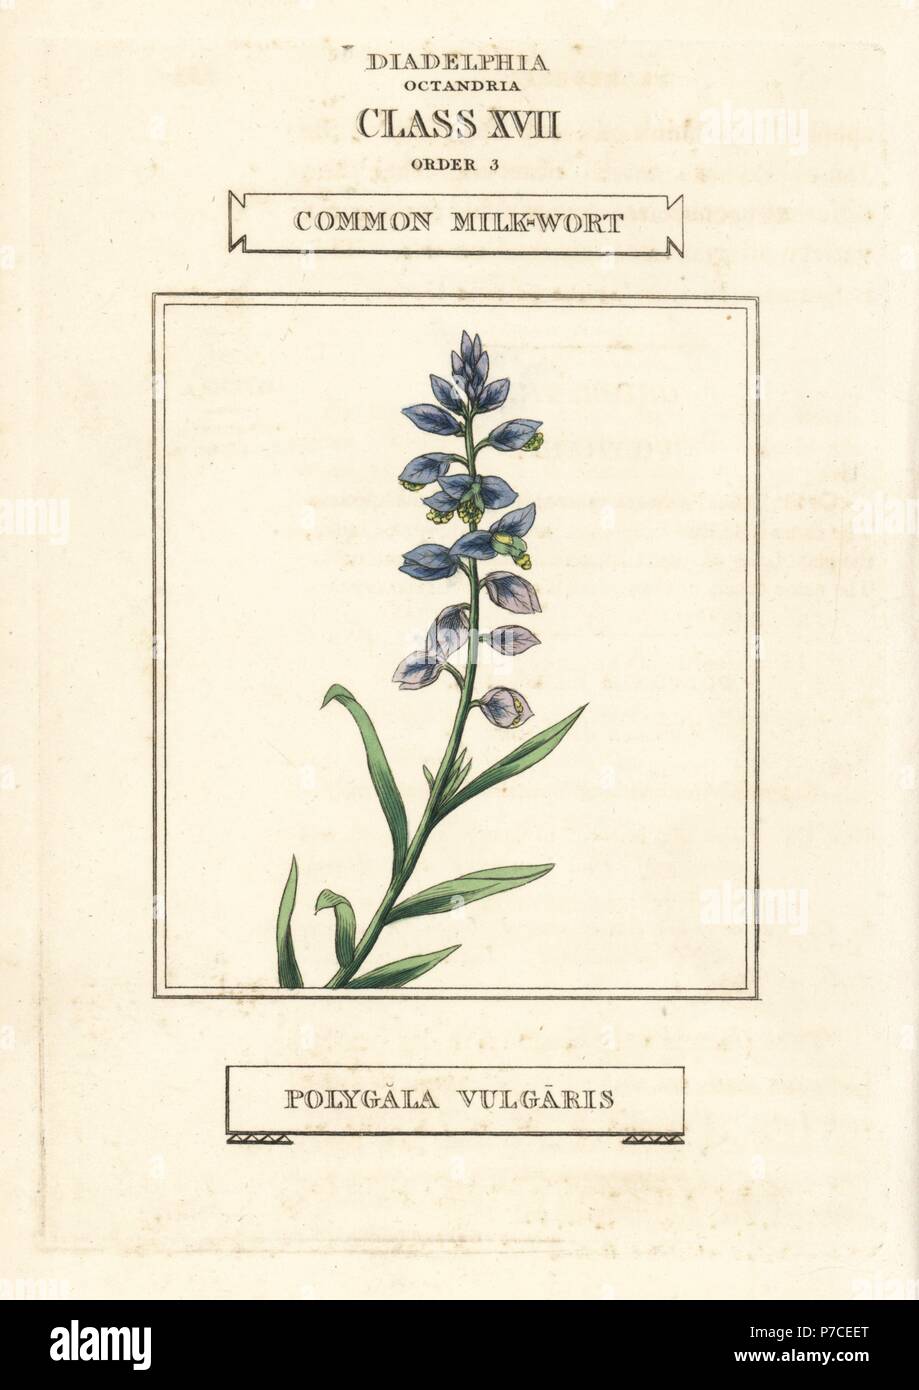 Common milkwort, Polygala vulgaris. Handcoloured copperplate engraving after an illustration by Richard Duppa from his The Classes and Orders of the Linnaean System of Botany, Longman, Hurst, London, 1816. Stock Photo